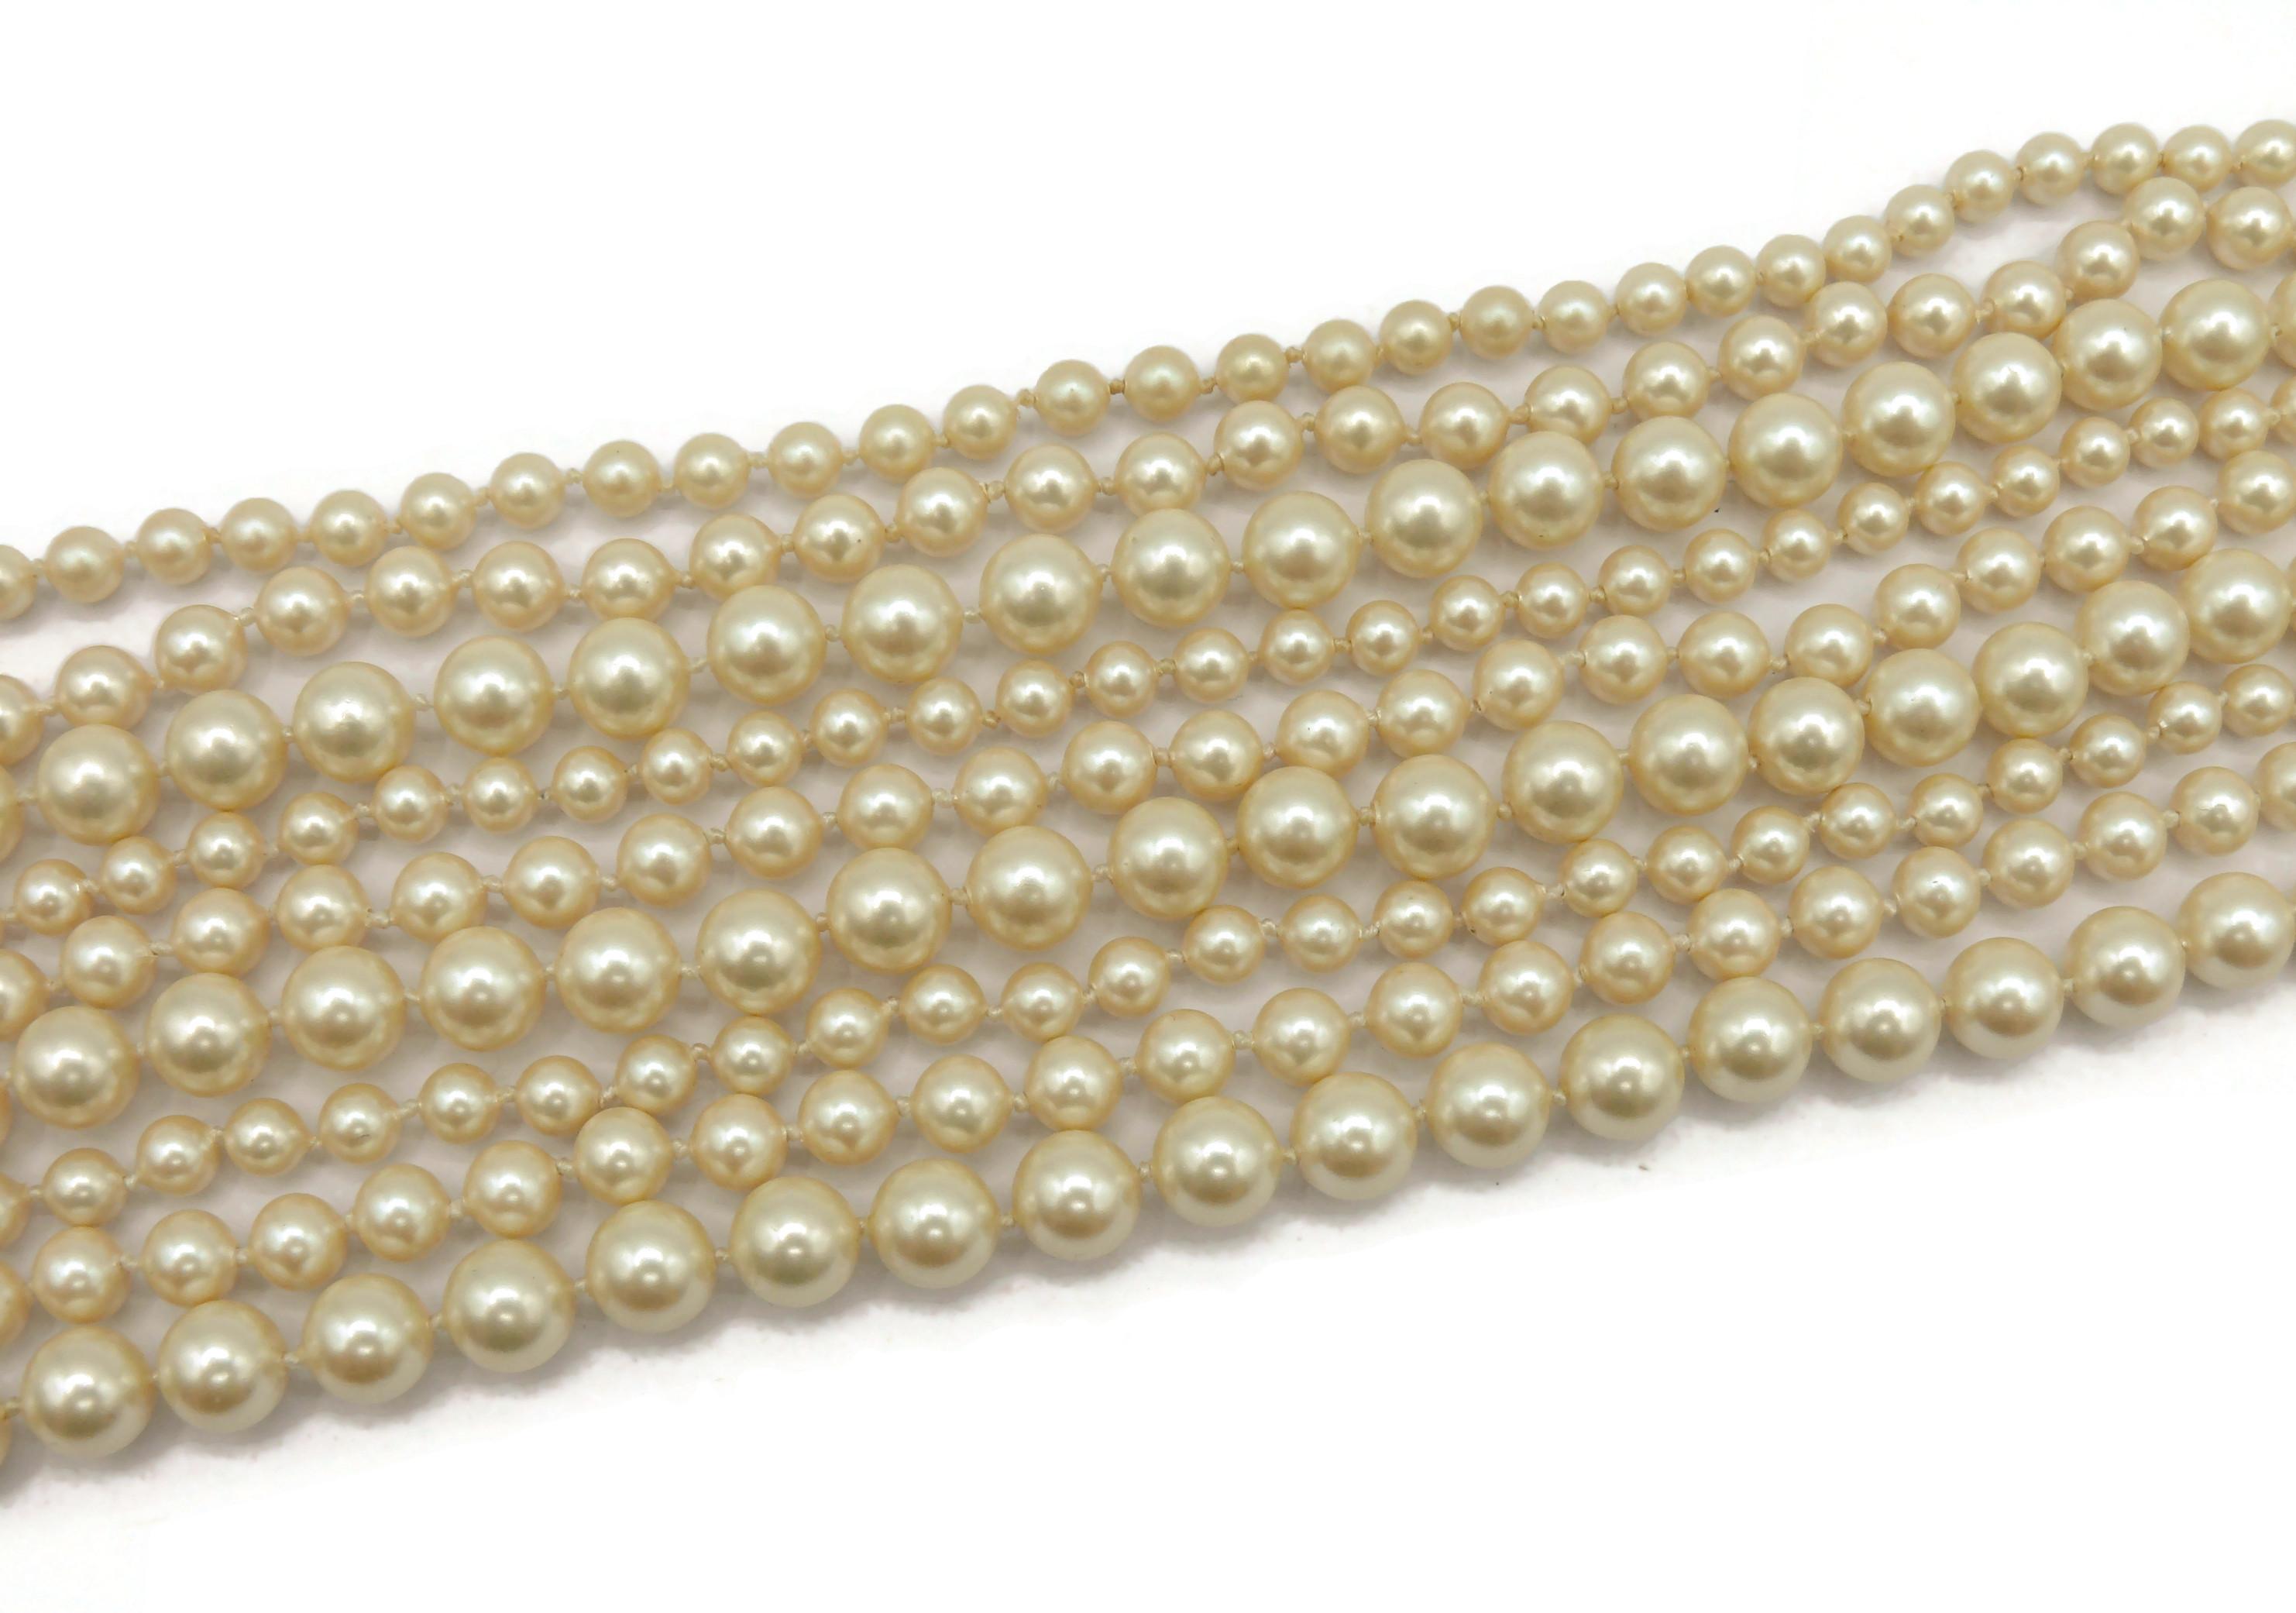 CHRISTIAN DIOR Vintage Multi-Strand Faux Pearl Necklace For Sale 5